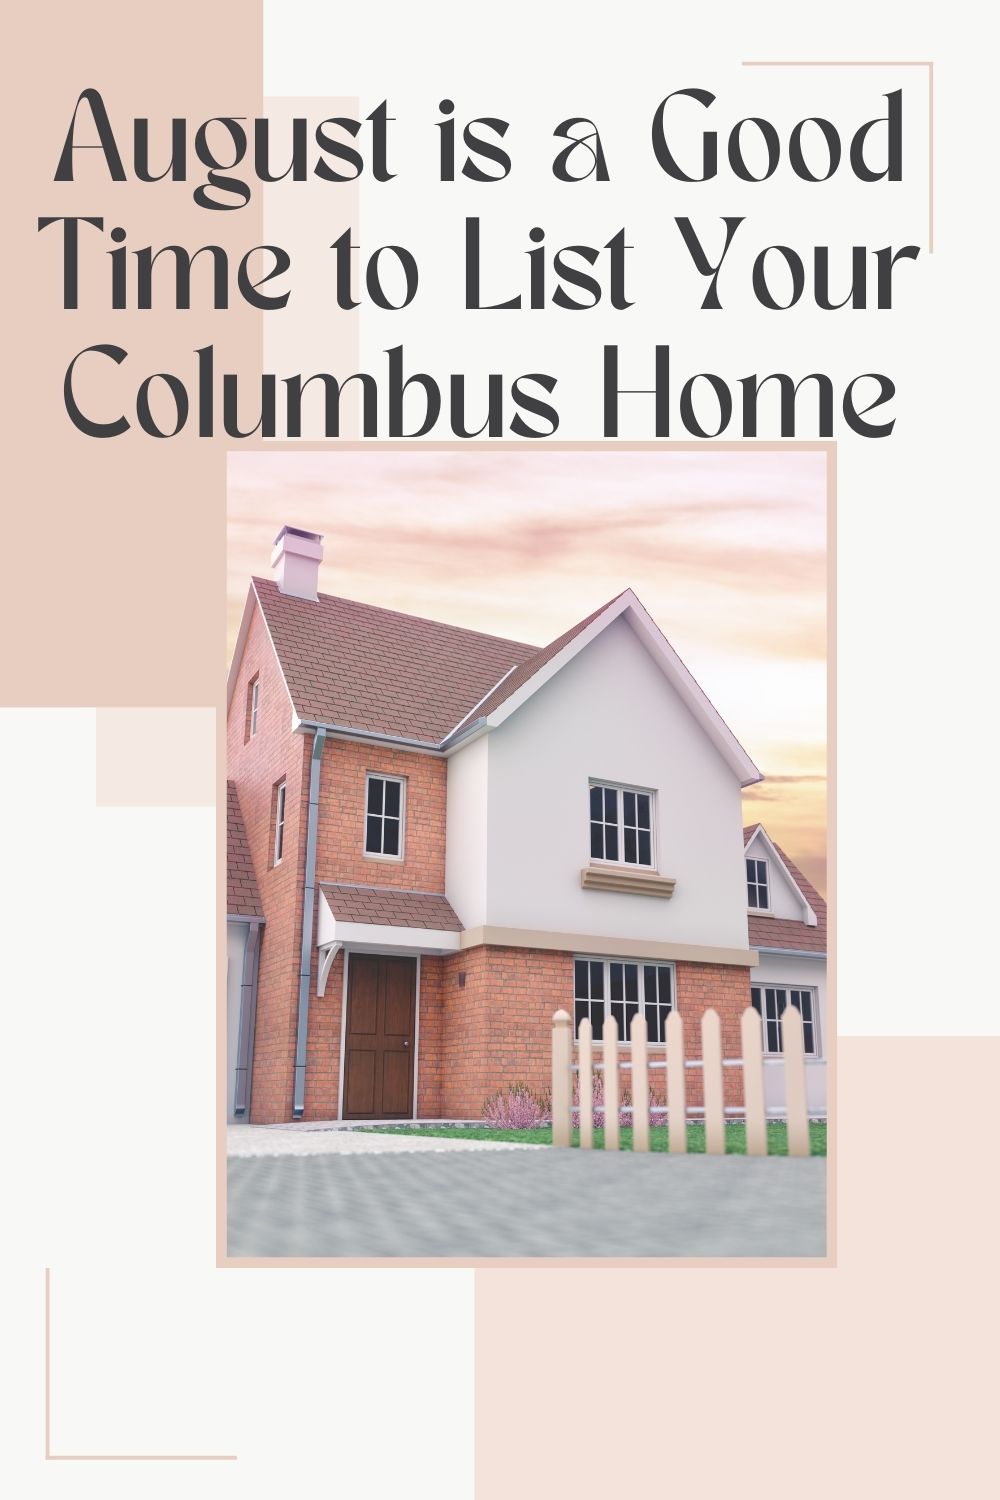 August is a Good Time to List Your Columbus Home